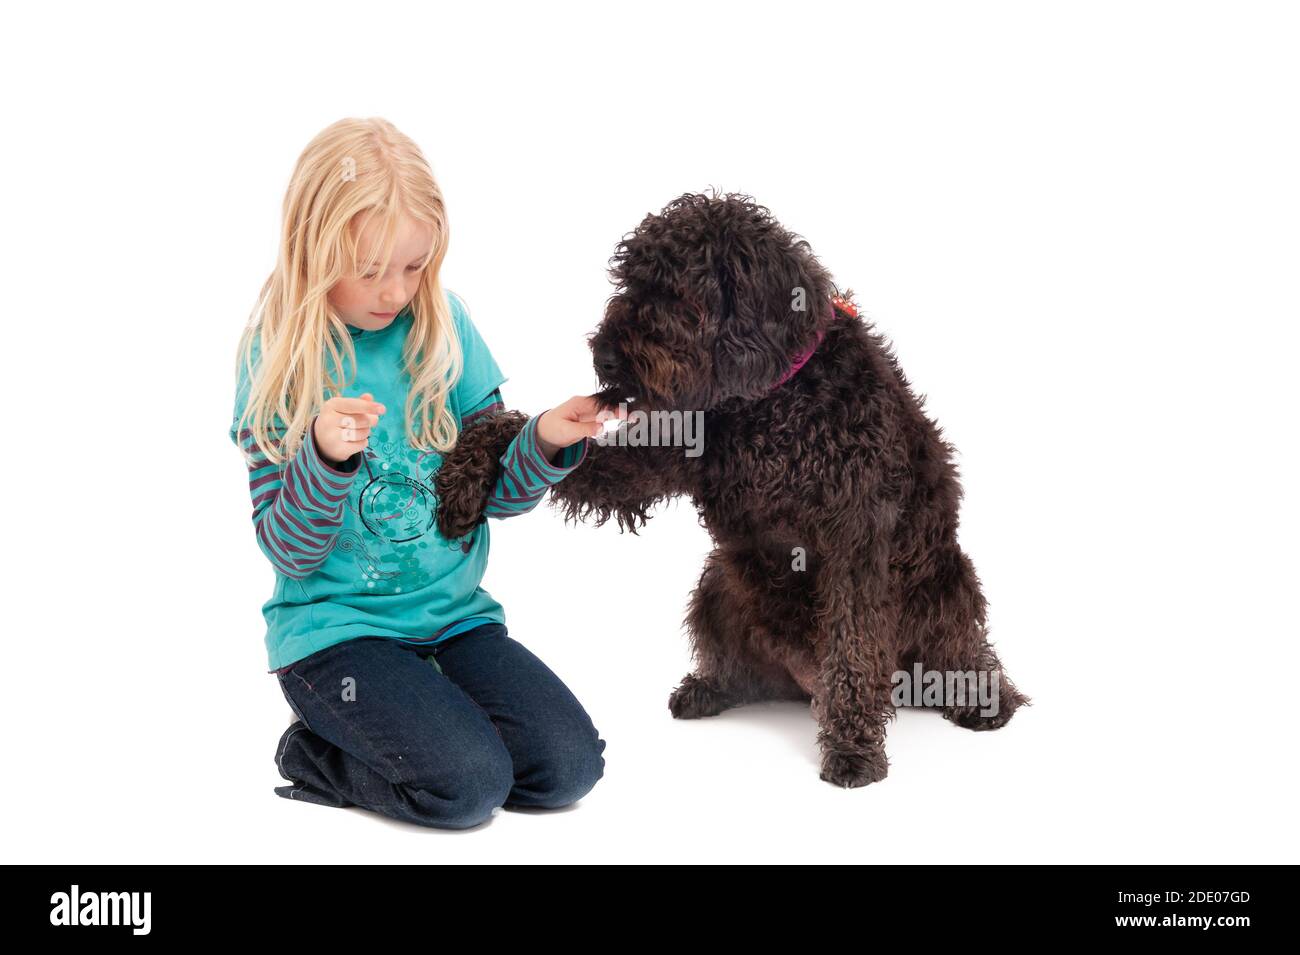 A black labradoodle begging a young blonde girl for a treat on a white studio background. Stock Photo